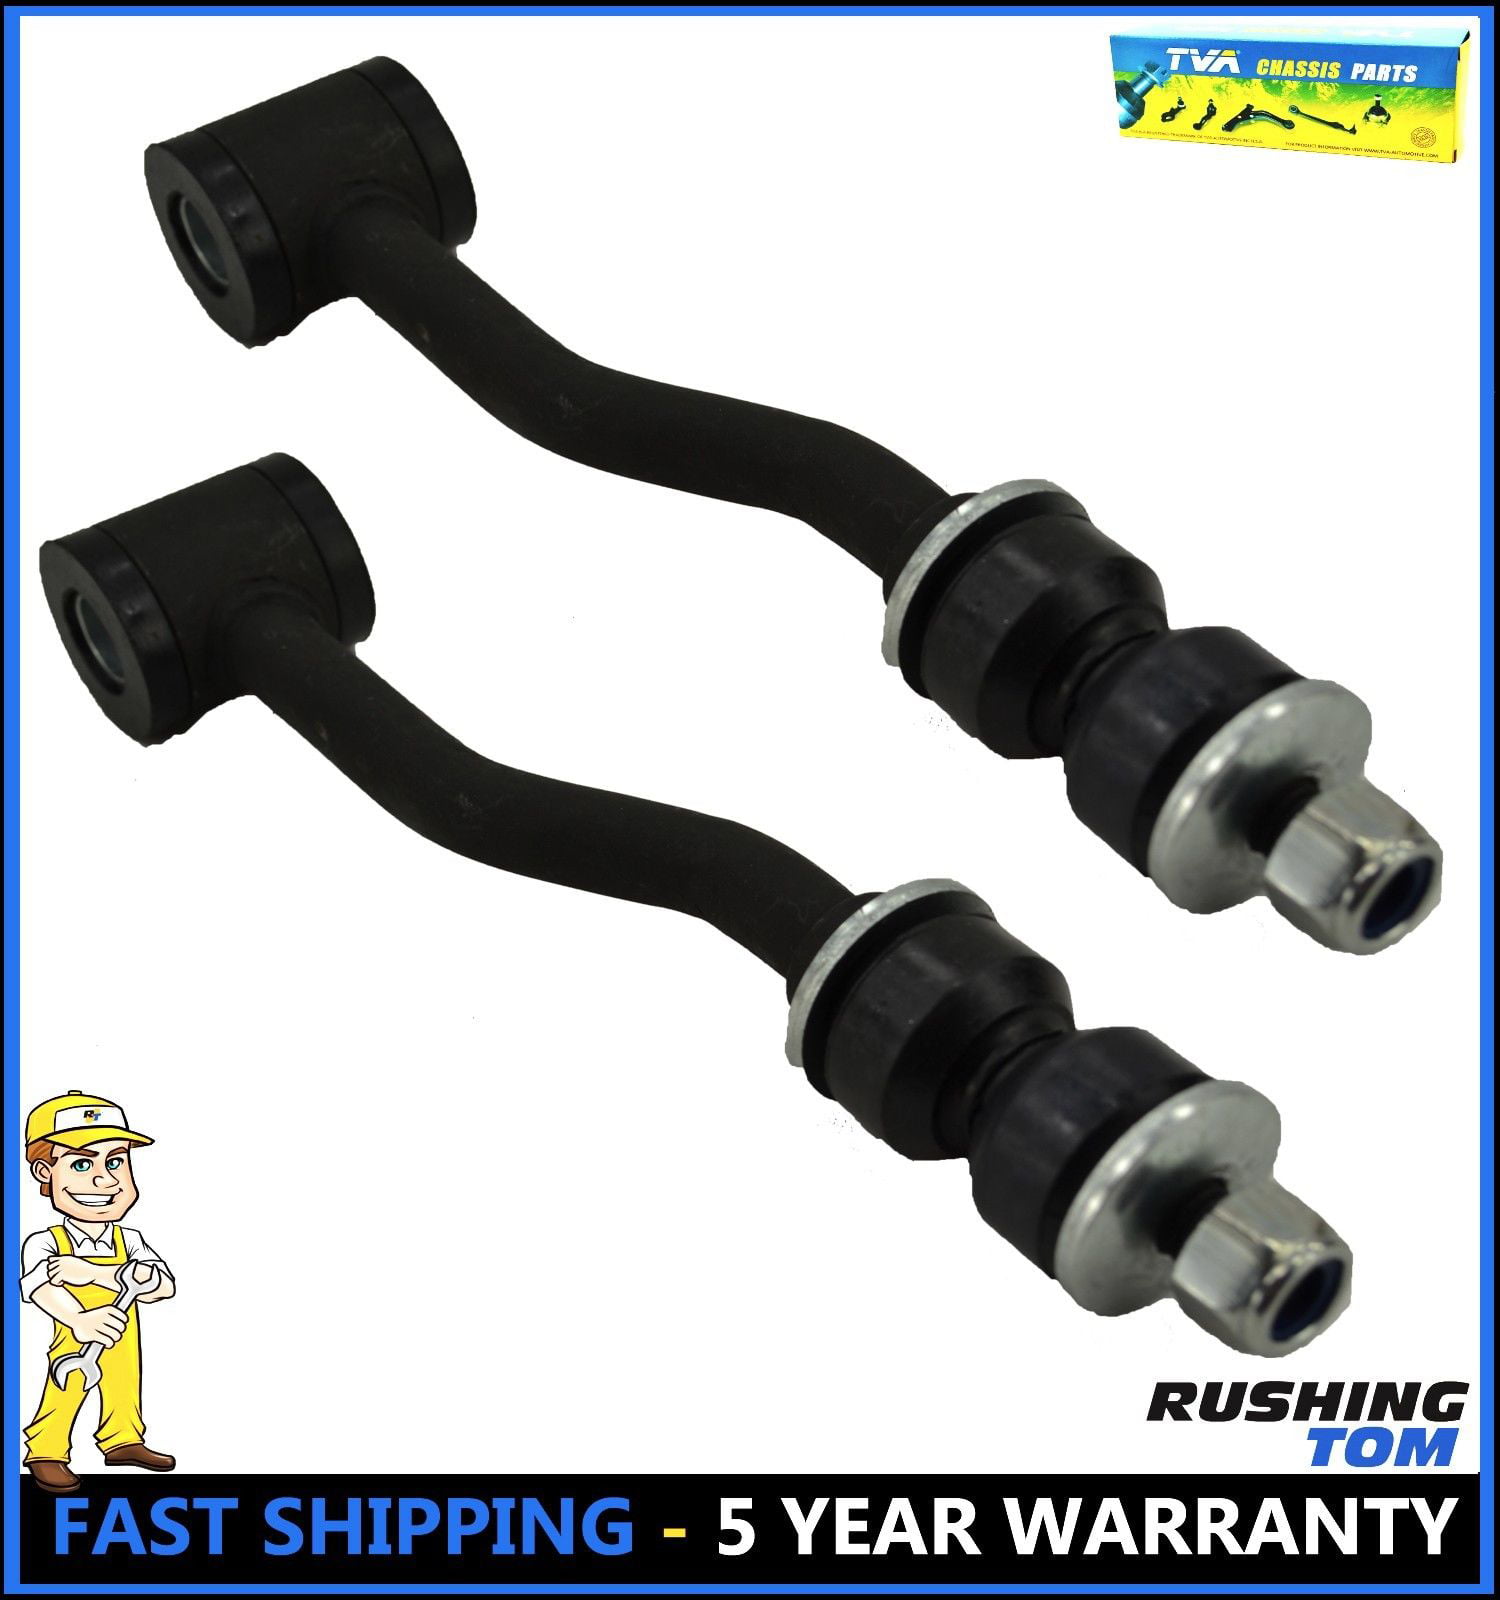 2 Pc New Suspension Kit for Grand Cherokee Front Sway Bar End Link 3 Yr Warranty